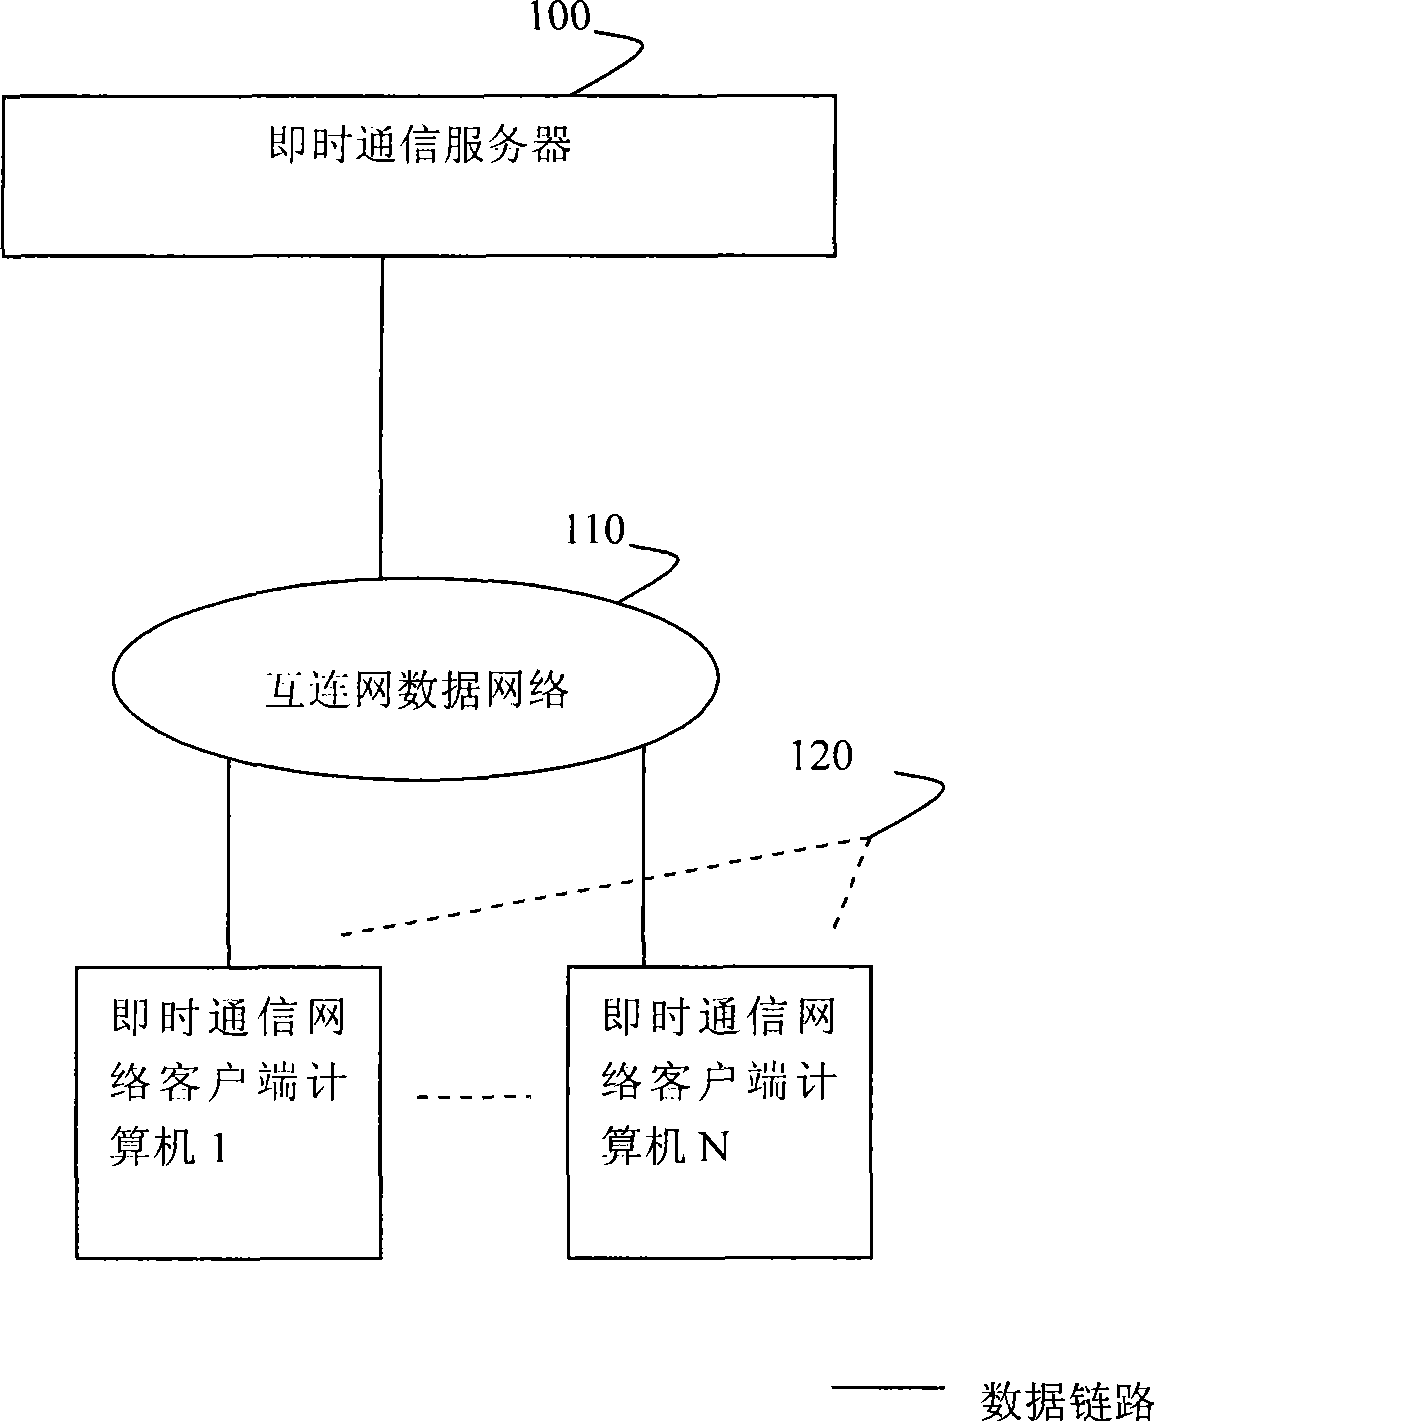 System and method for adding closed customer group in instant communication network customer terminal